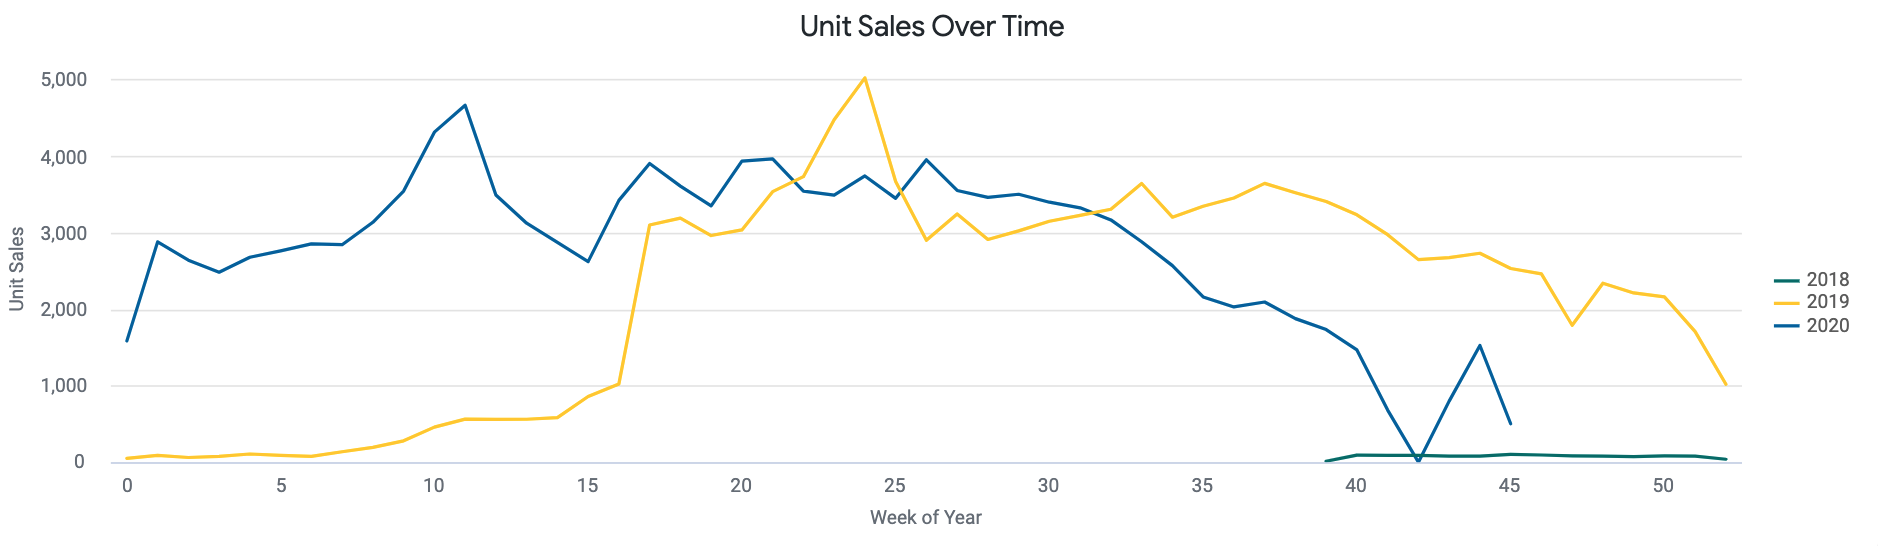 Unit_Sales_Over_Time.png